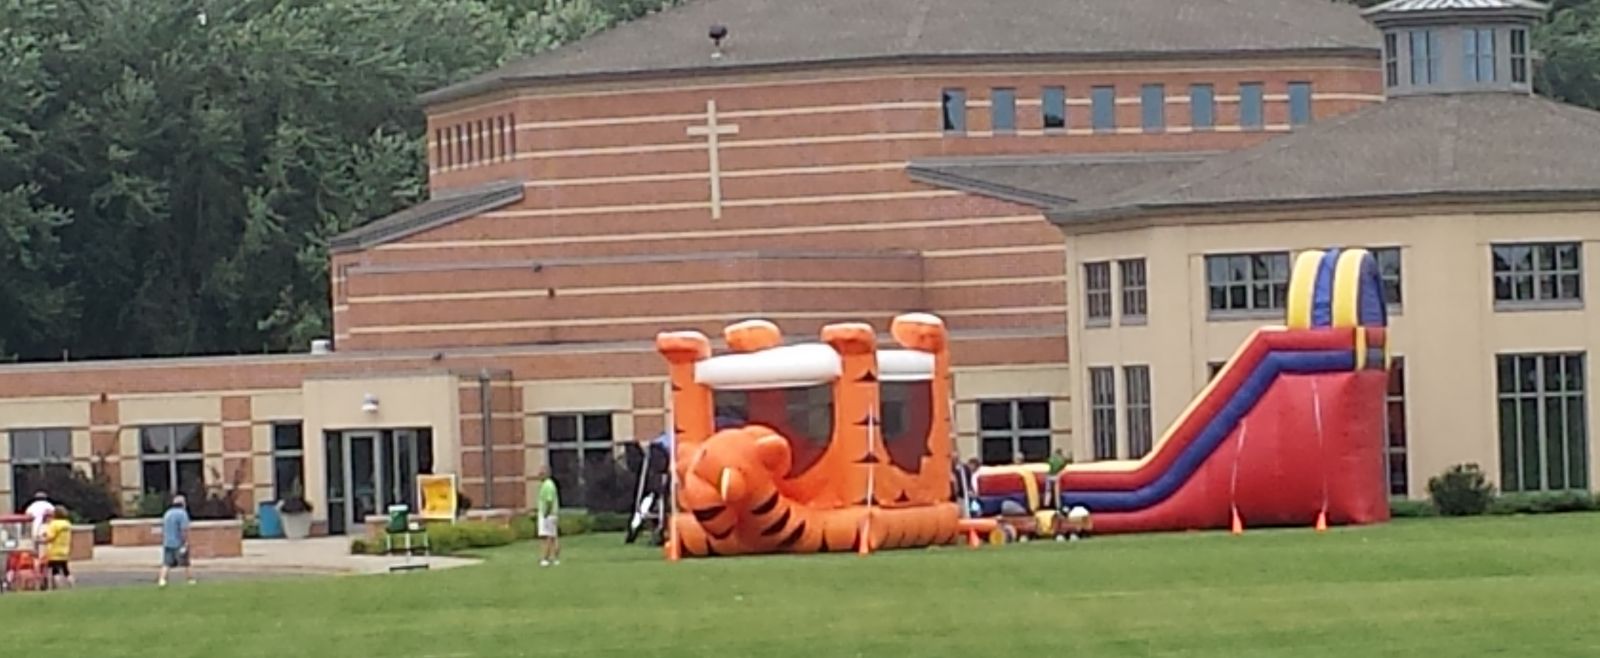 Tiger Belly Bouncer and 18' GIANT Dry Slide in front of church